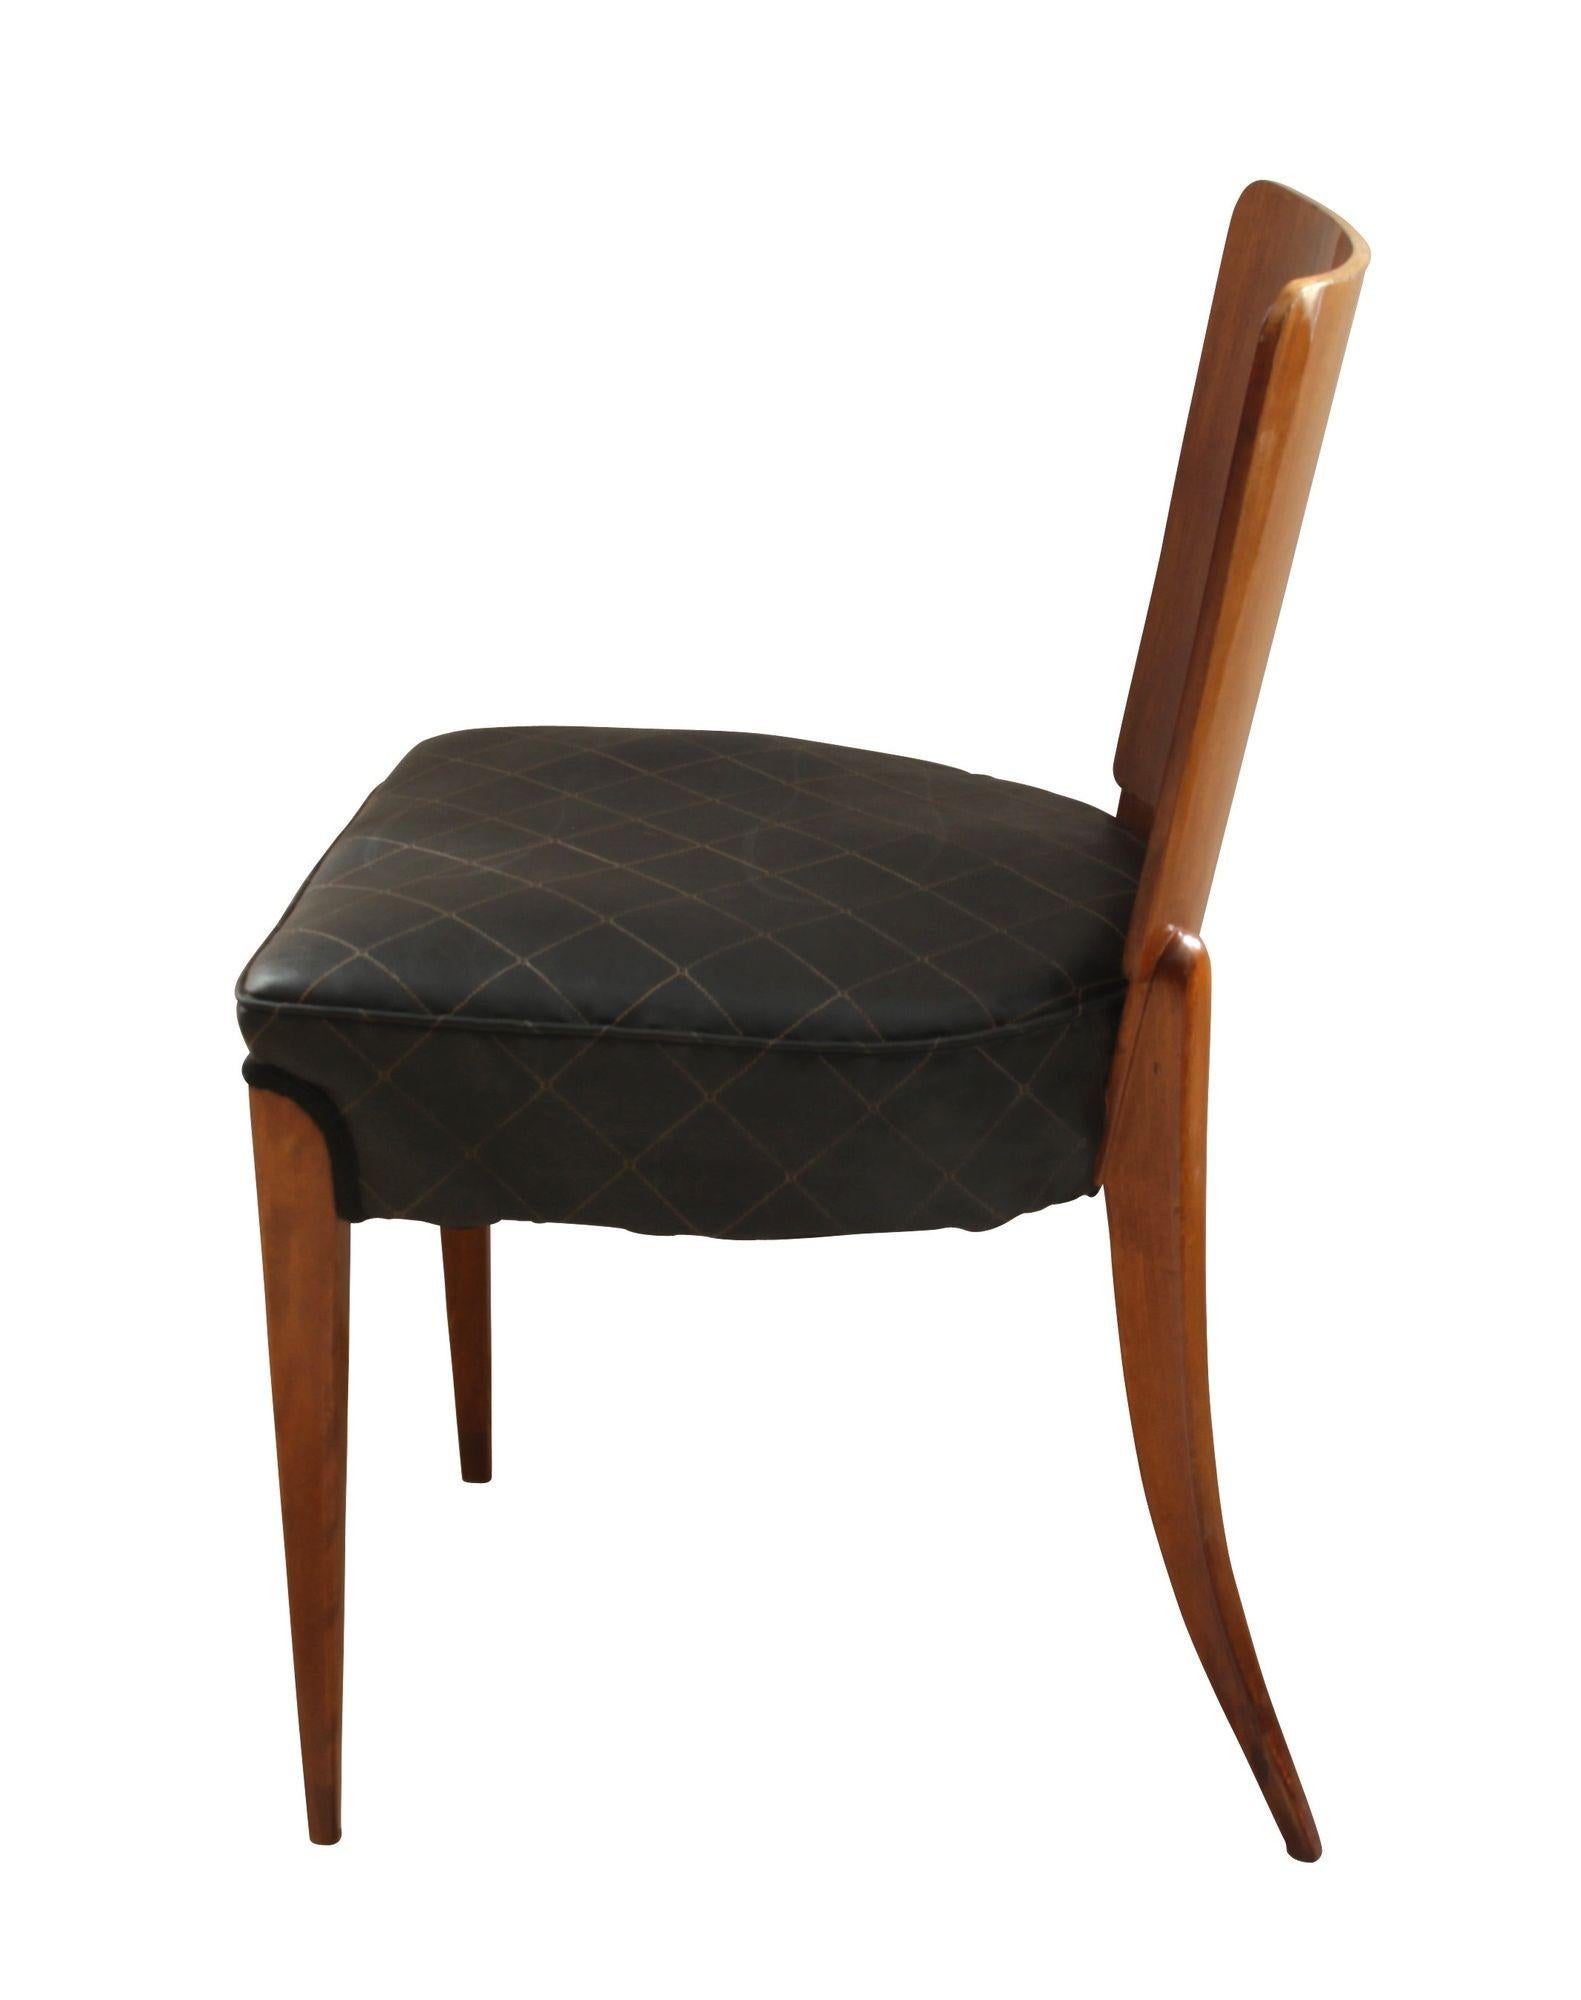 Polished Pair of J. Halabala Chairs H214, Walnut, Beech, Faux Leather, Czech, 1930s For Sale